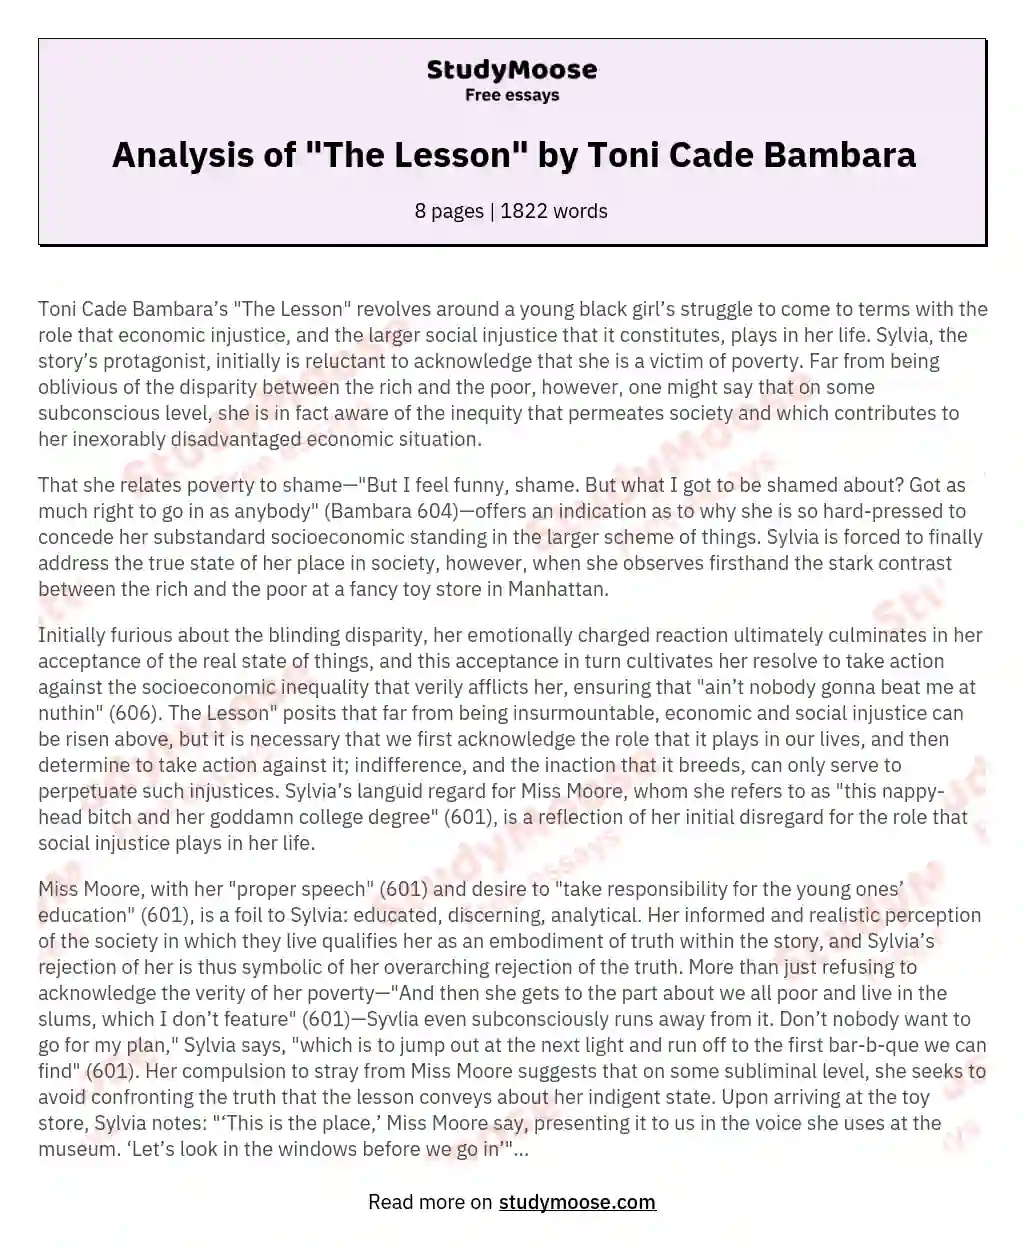 Analysis of "The Lesson" by Toni Cade Bambara